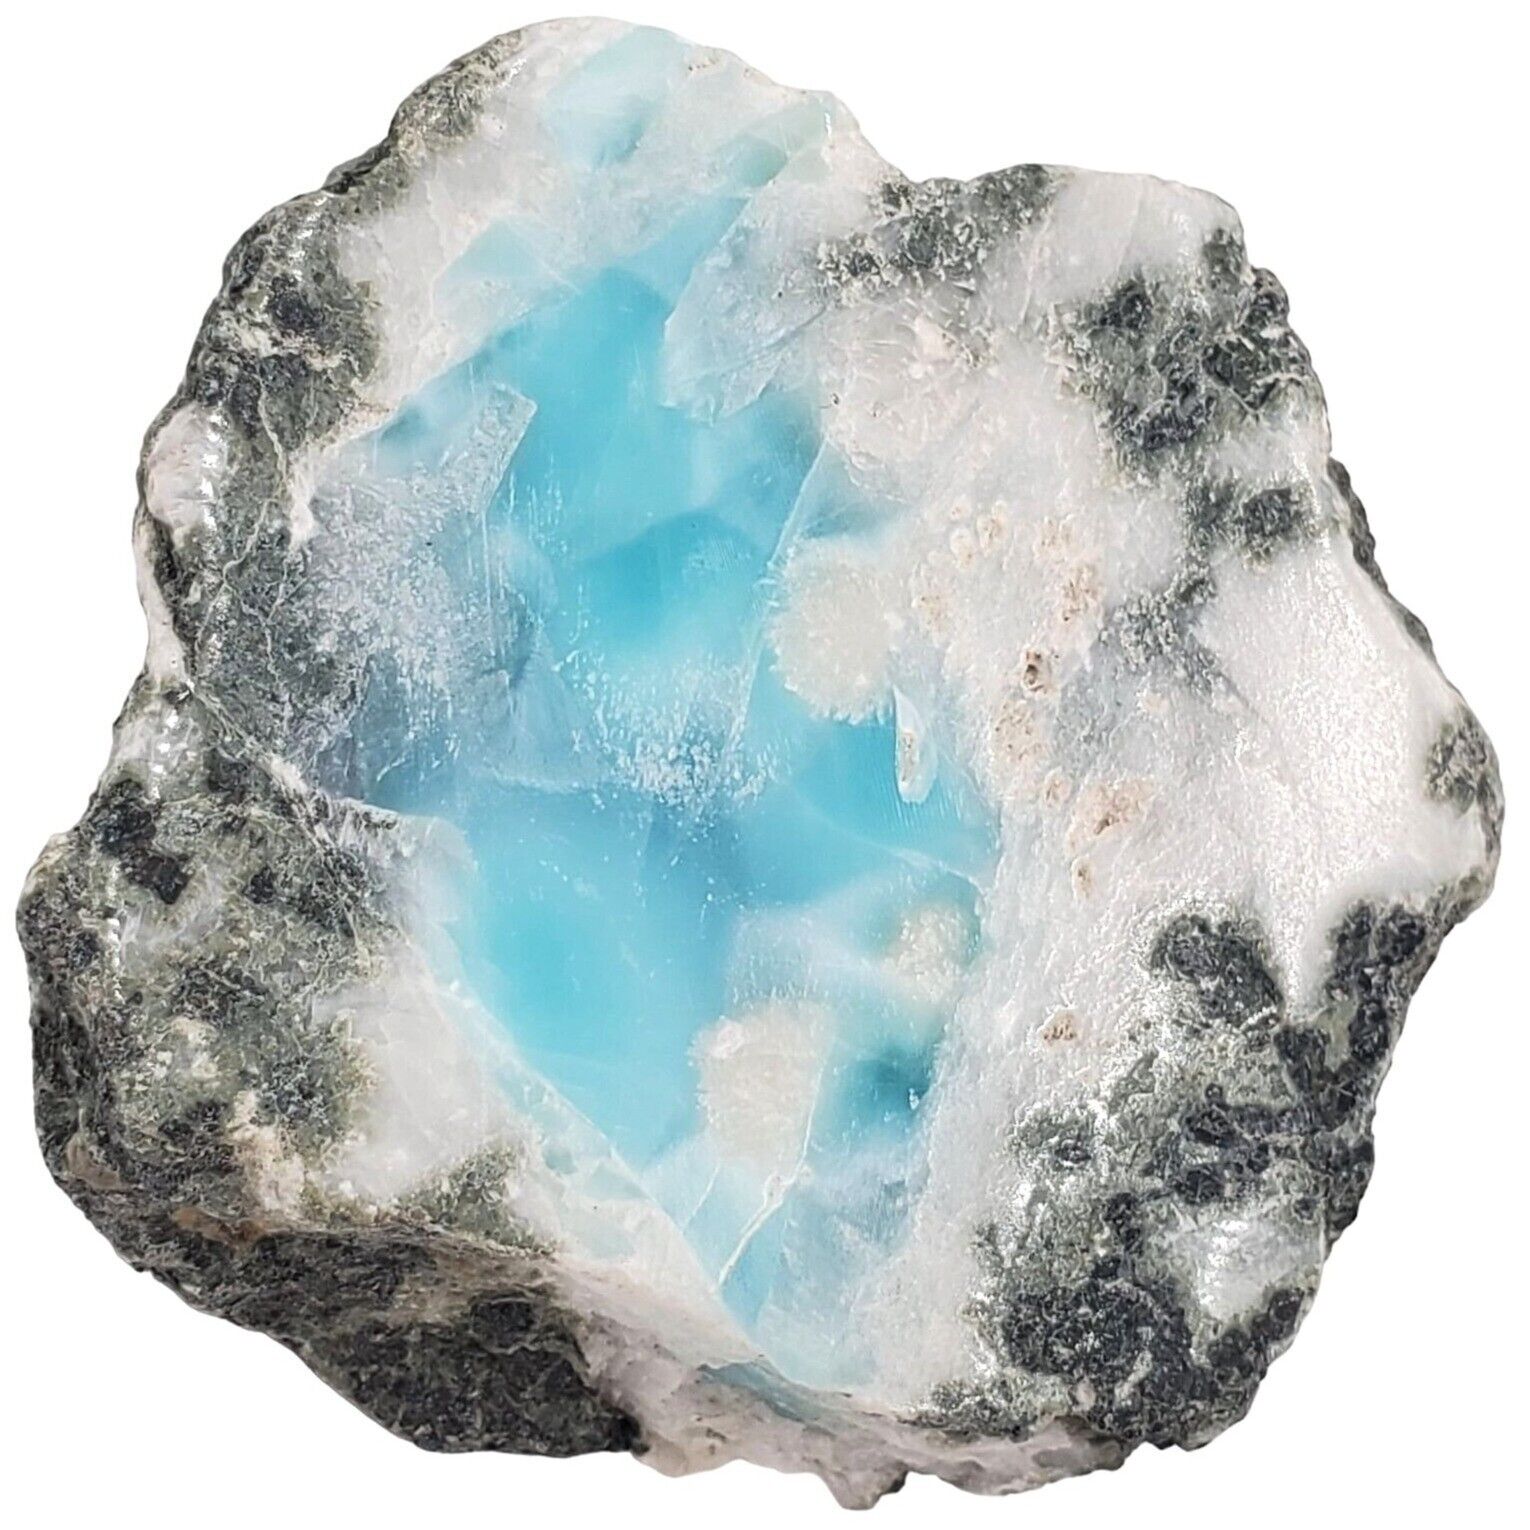 52g 260ct Hand-picked Larimar pectolite Dominican Natural Rough Slab Rock Stone